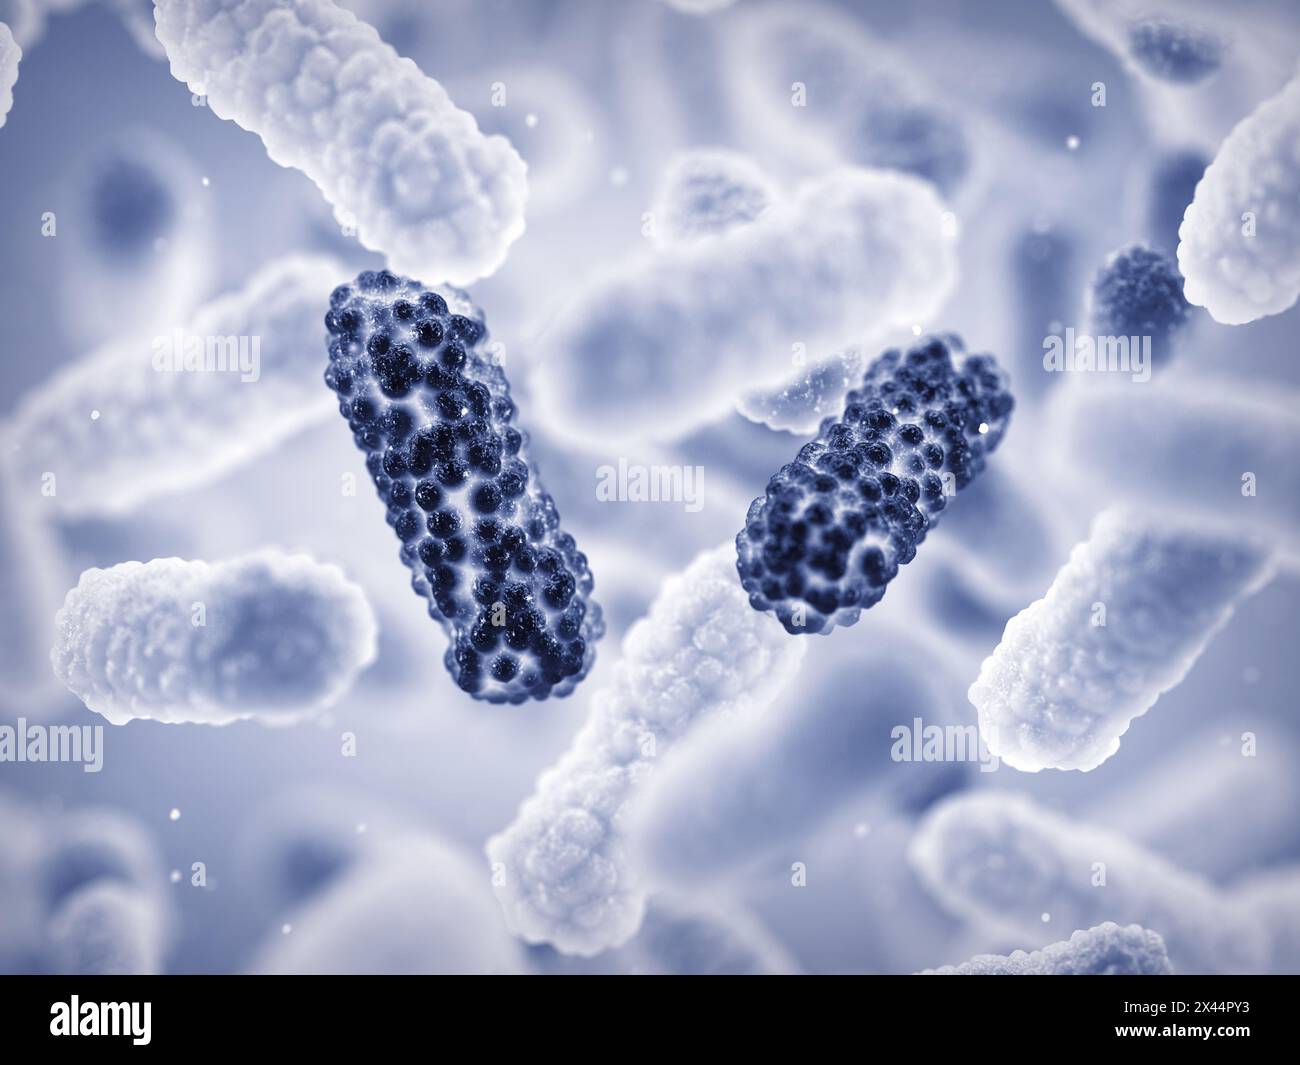 Antimicrobial Resistance (AMR) occurs when bacteria change over time and develop the ability to defeat the drugs designed to kill them. Stock Photo